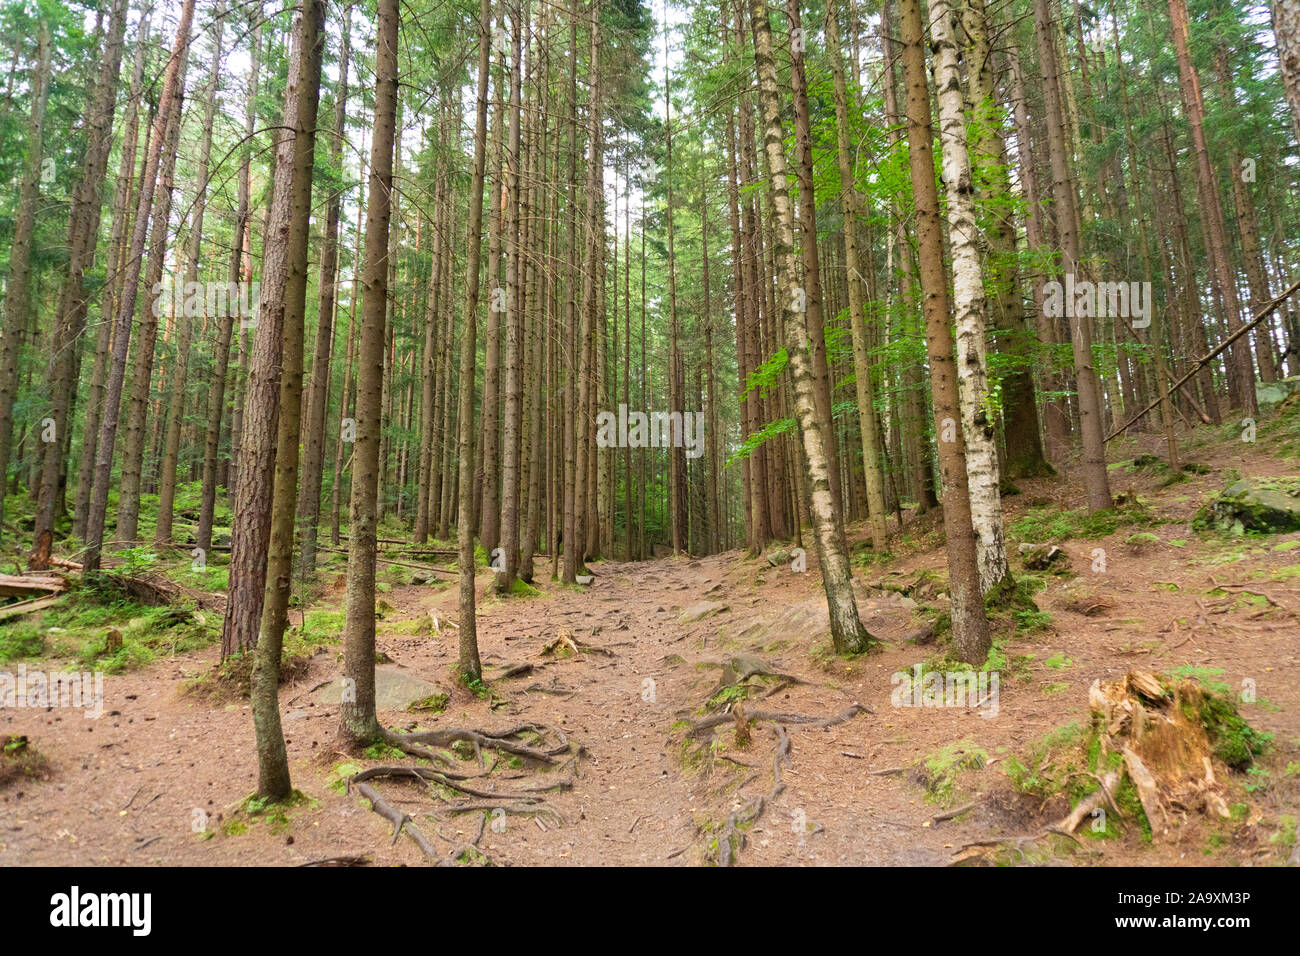 Calm and peaceful nature view in pine forest Stock Photo